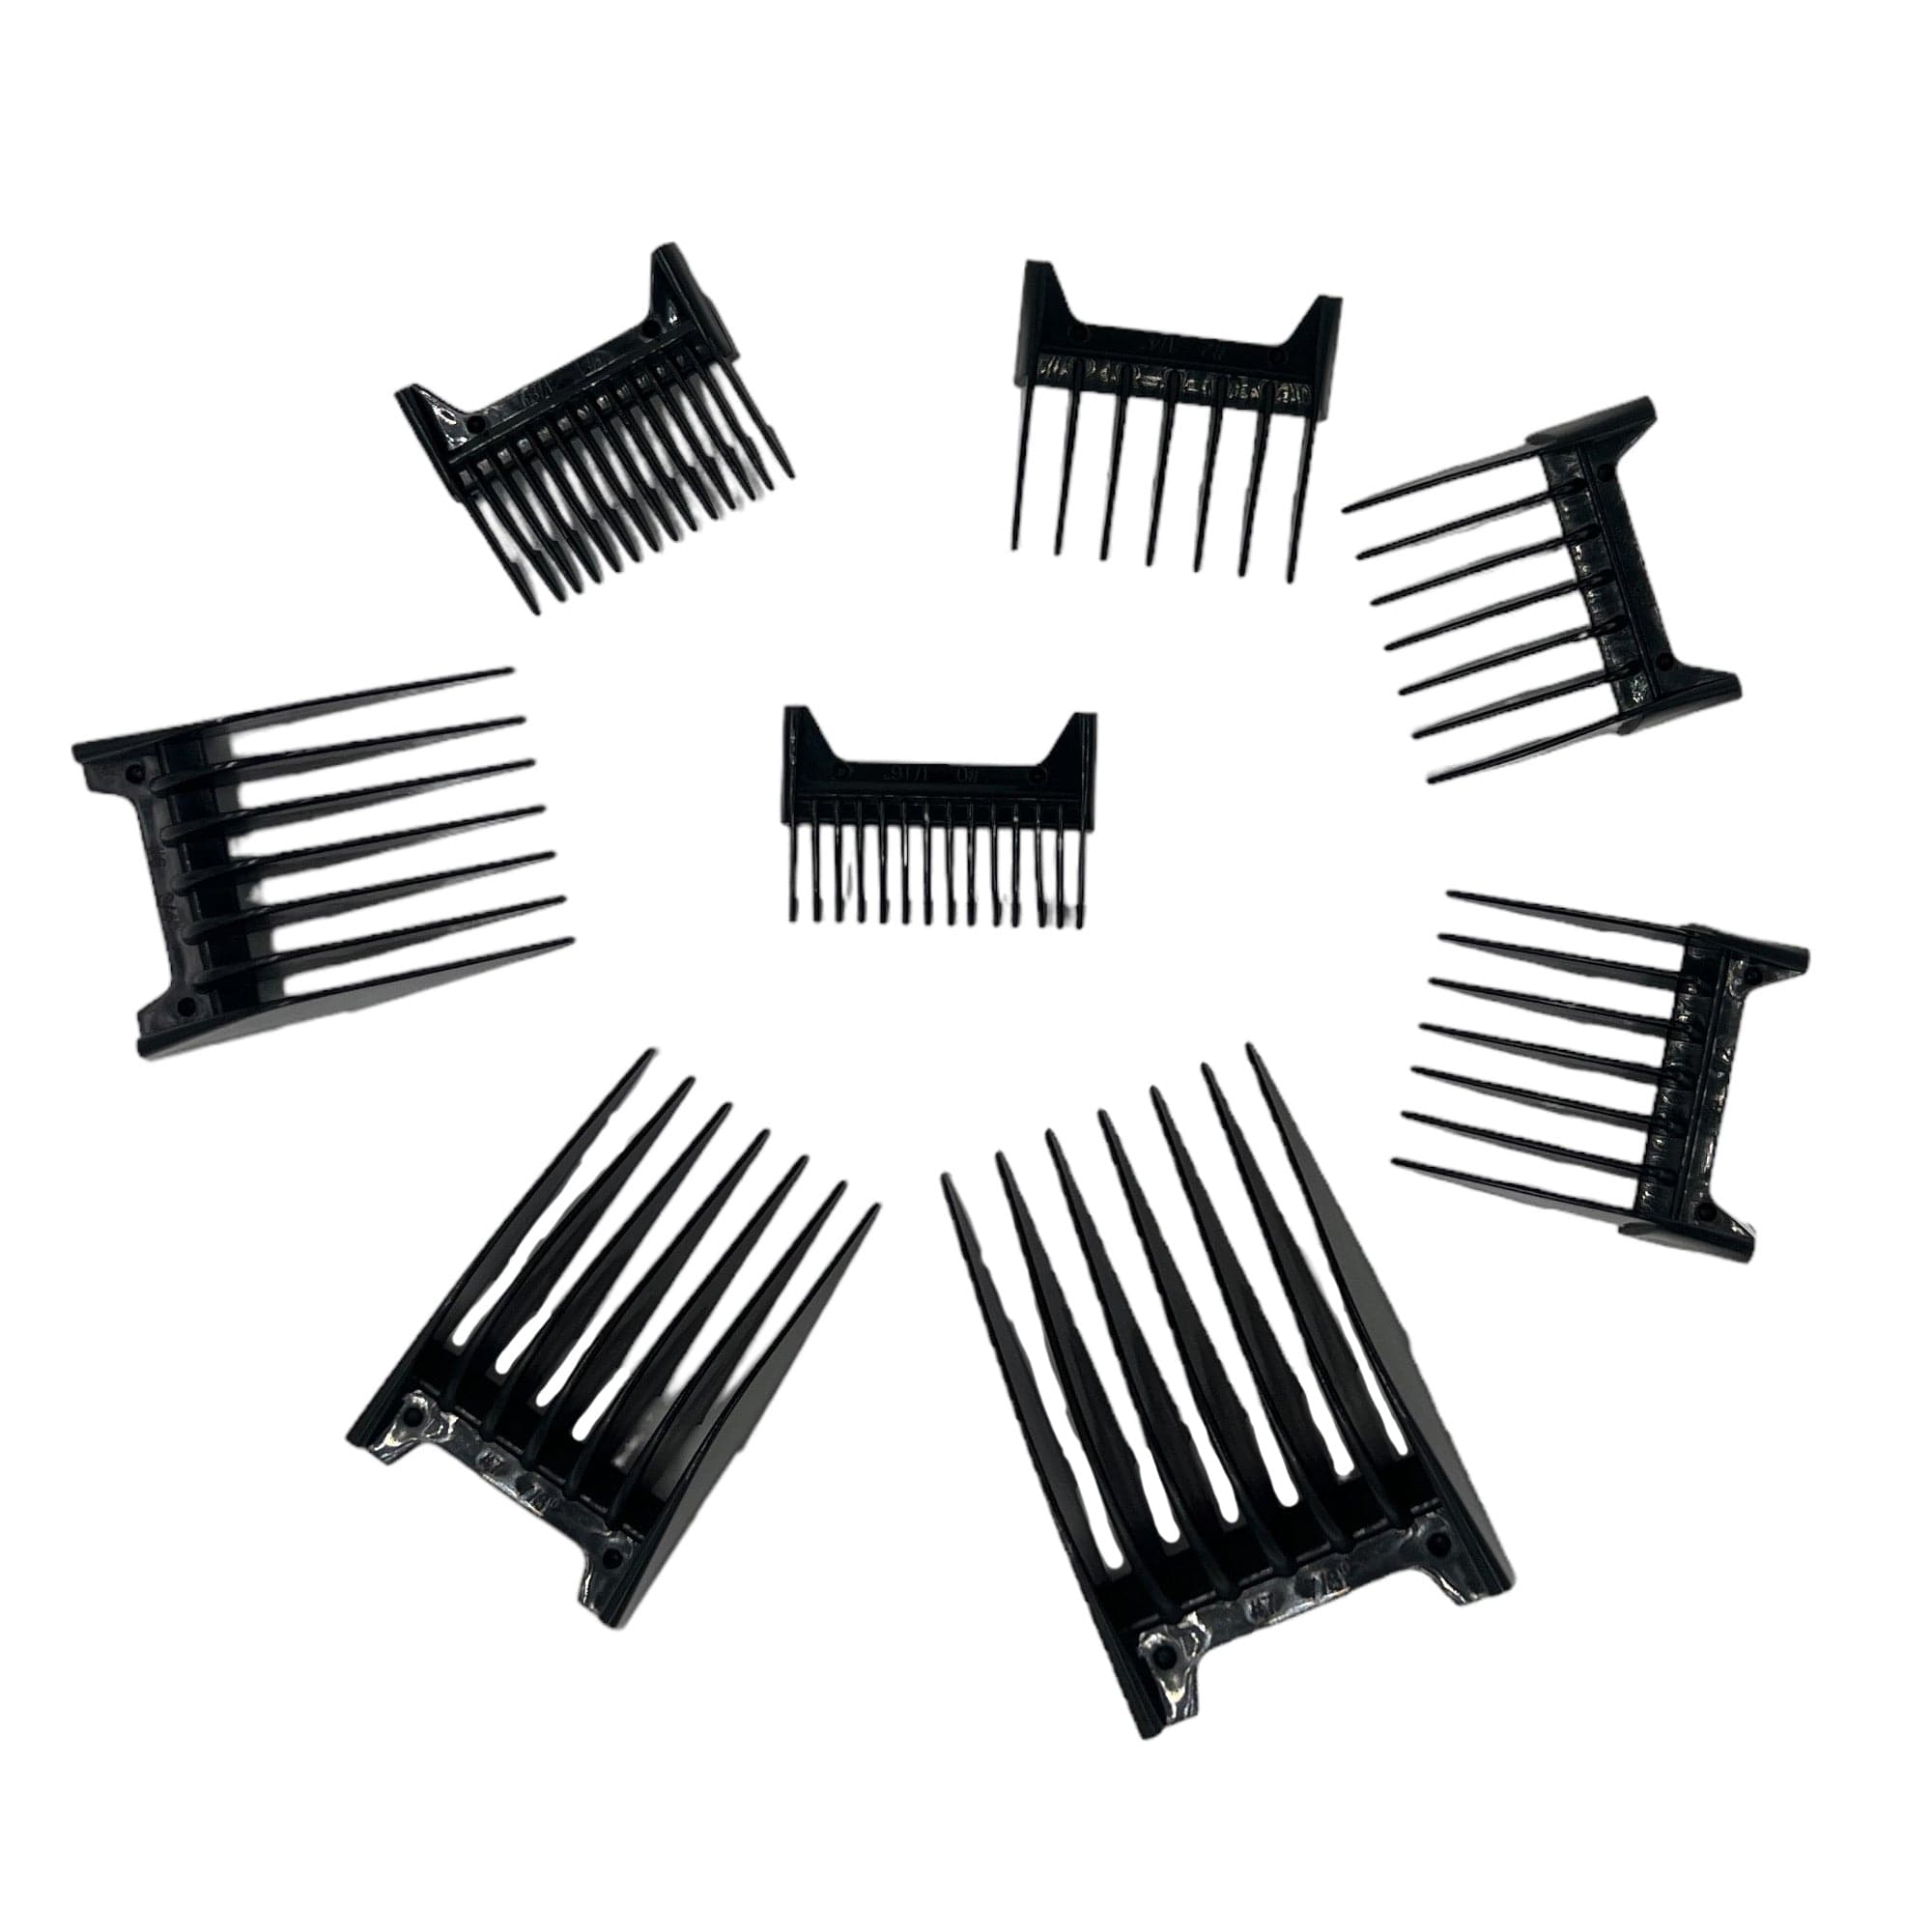 Oster - Comb Attachment Guards Set for Adjustable Blade Clipper 8pc